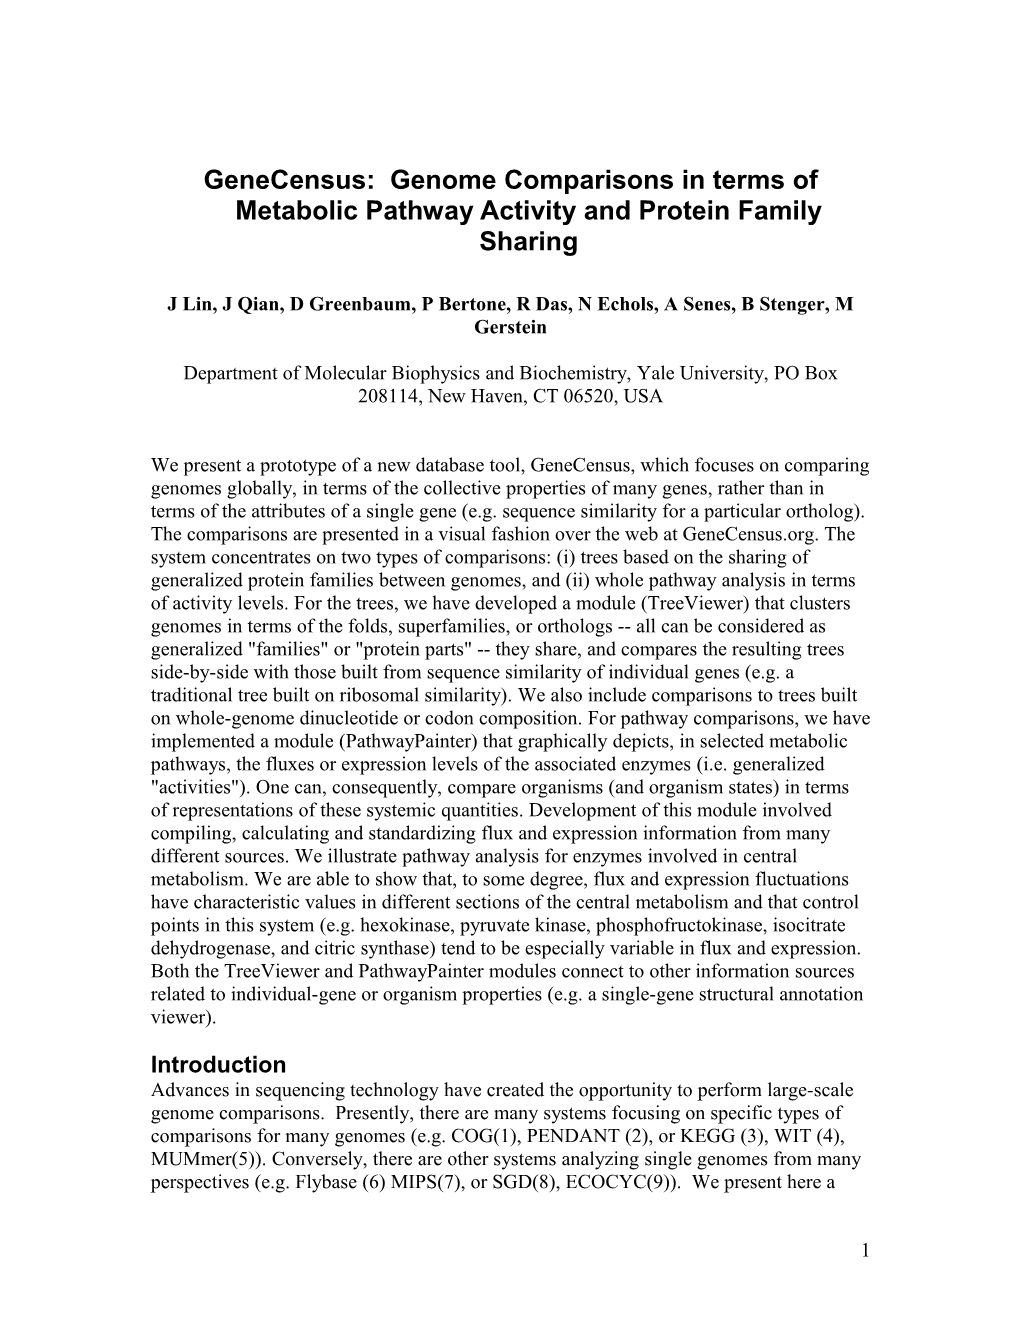 Genecensus: a Dynamical Online Viewer for Comparative Genomics